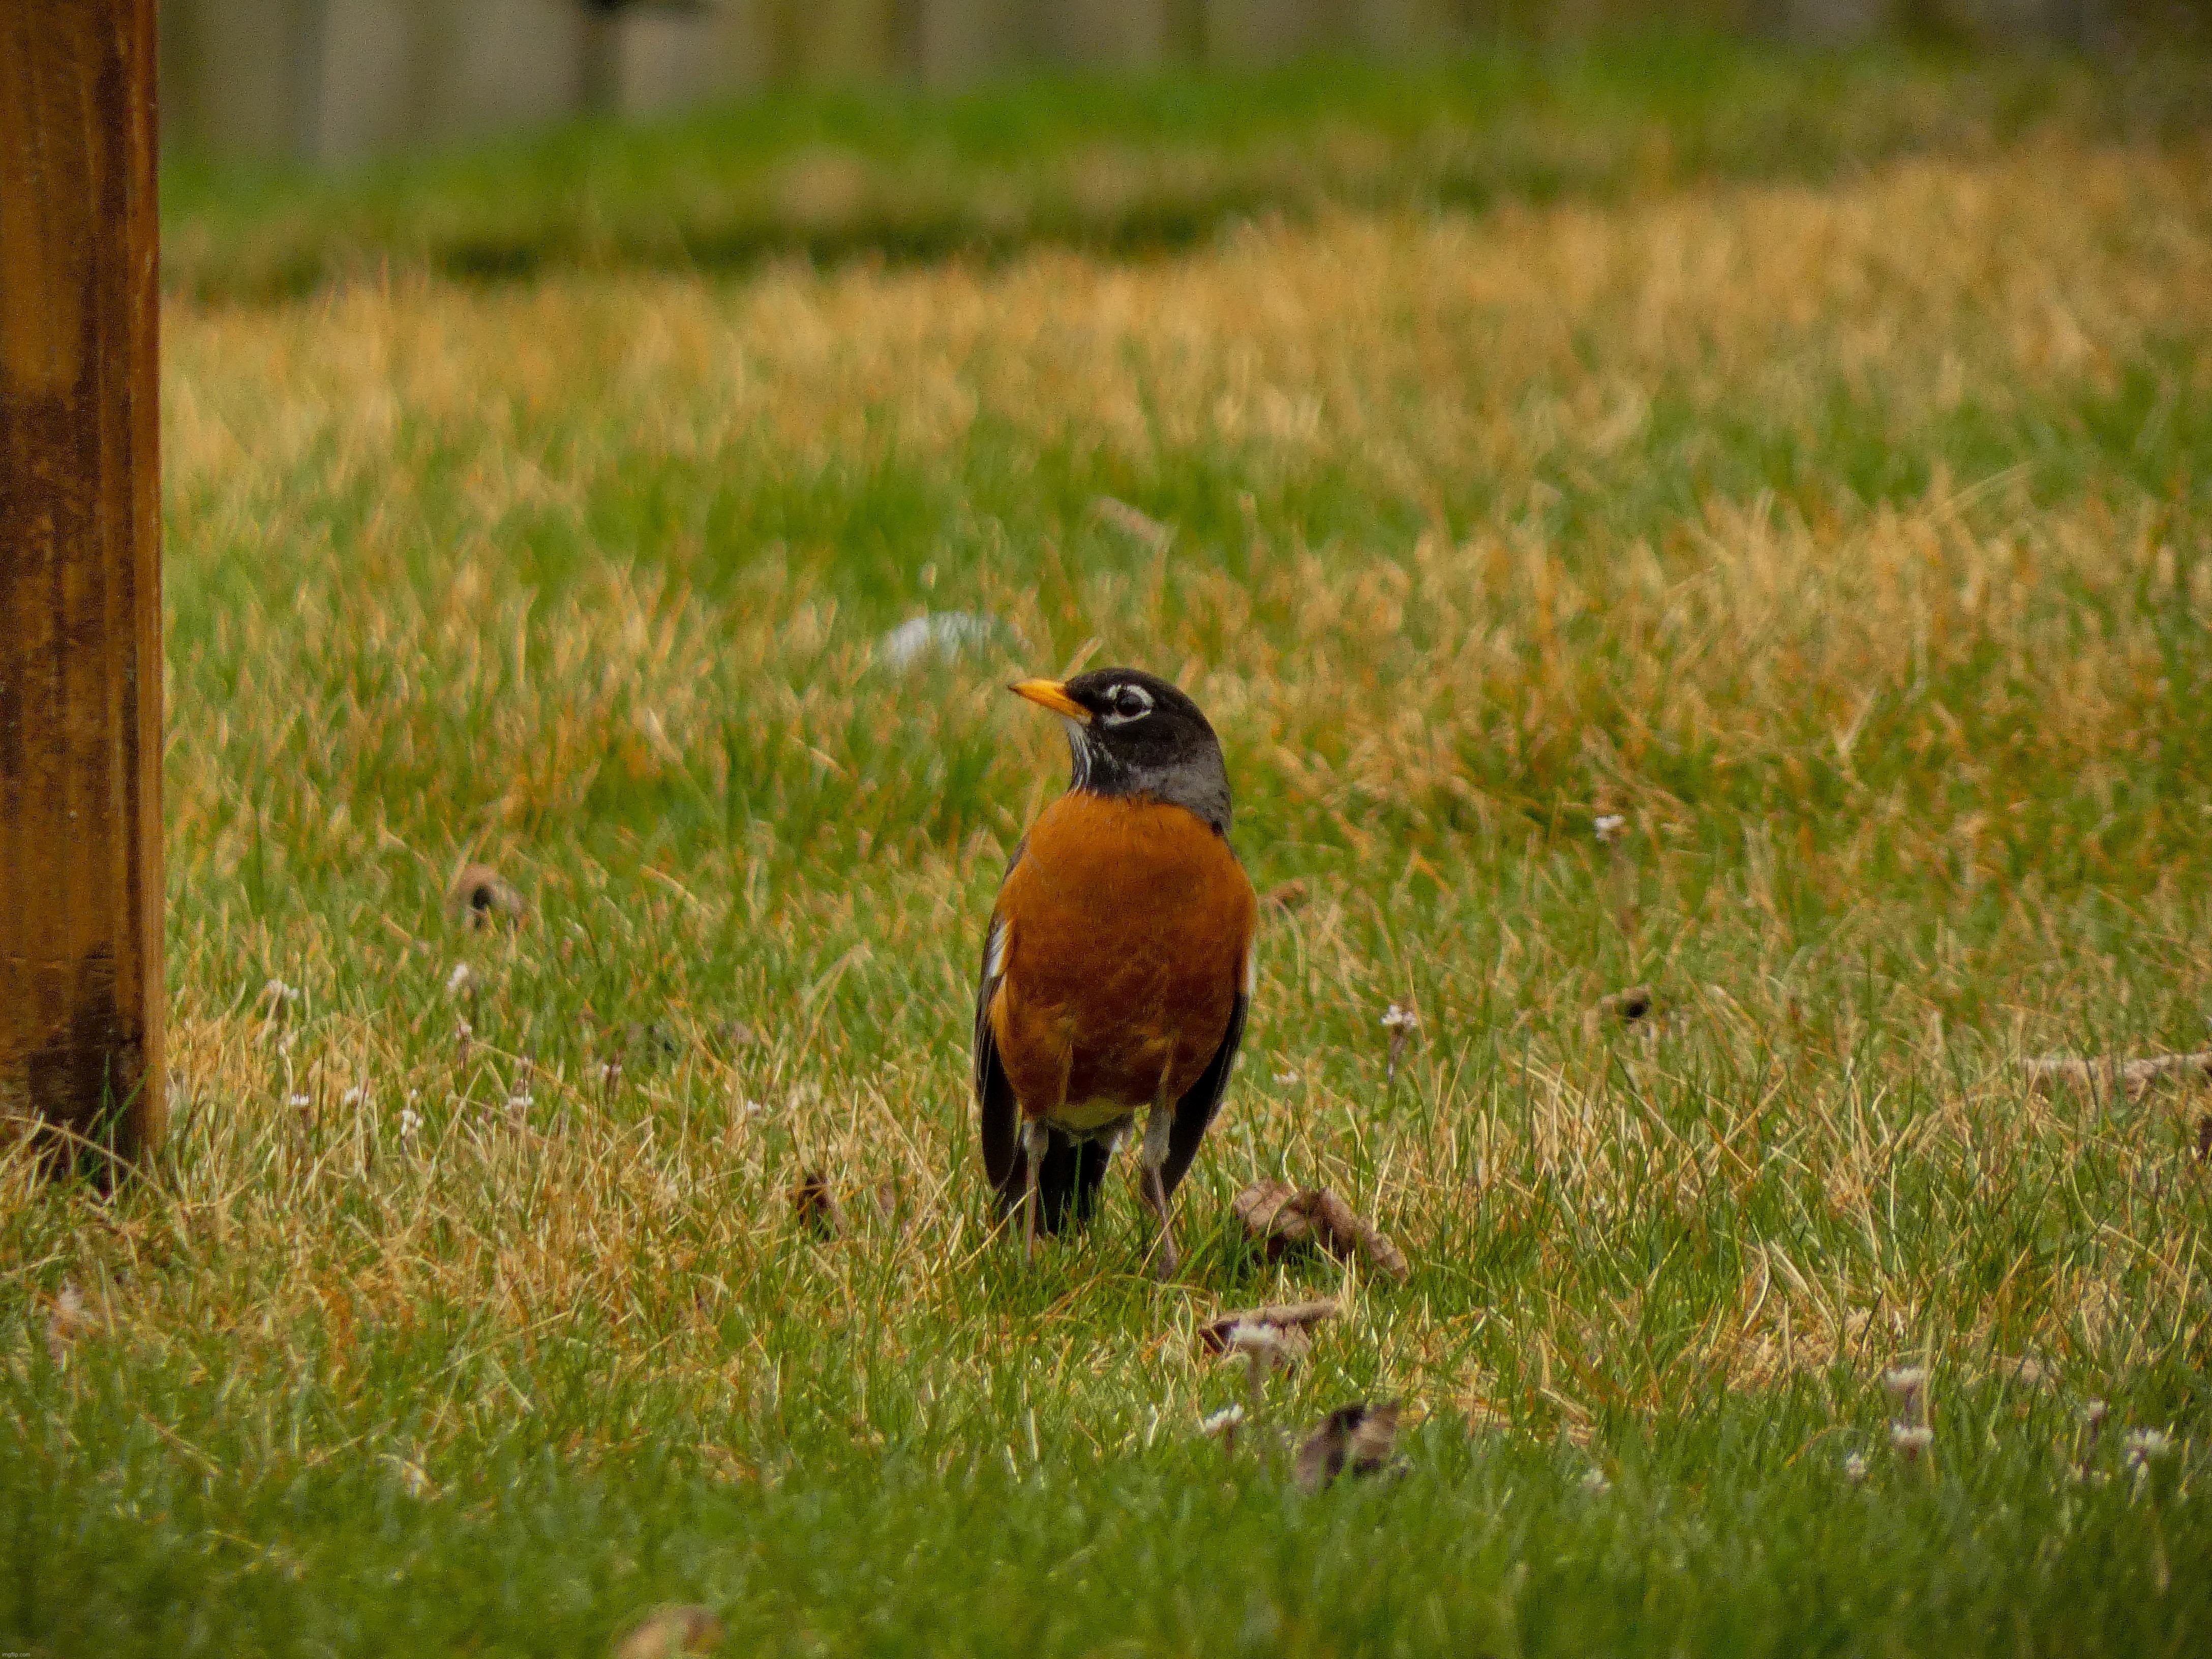 A robin that I saw | image tagged in share your own photos | made w/ Imgflip meme maker